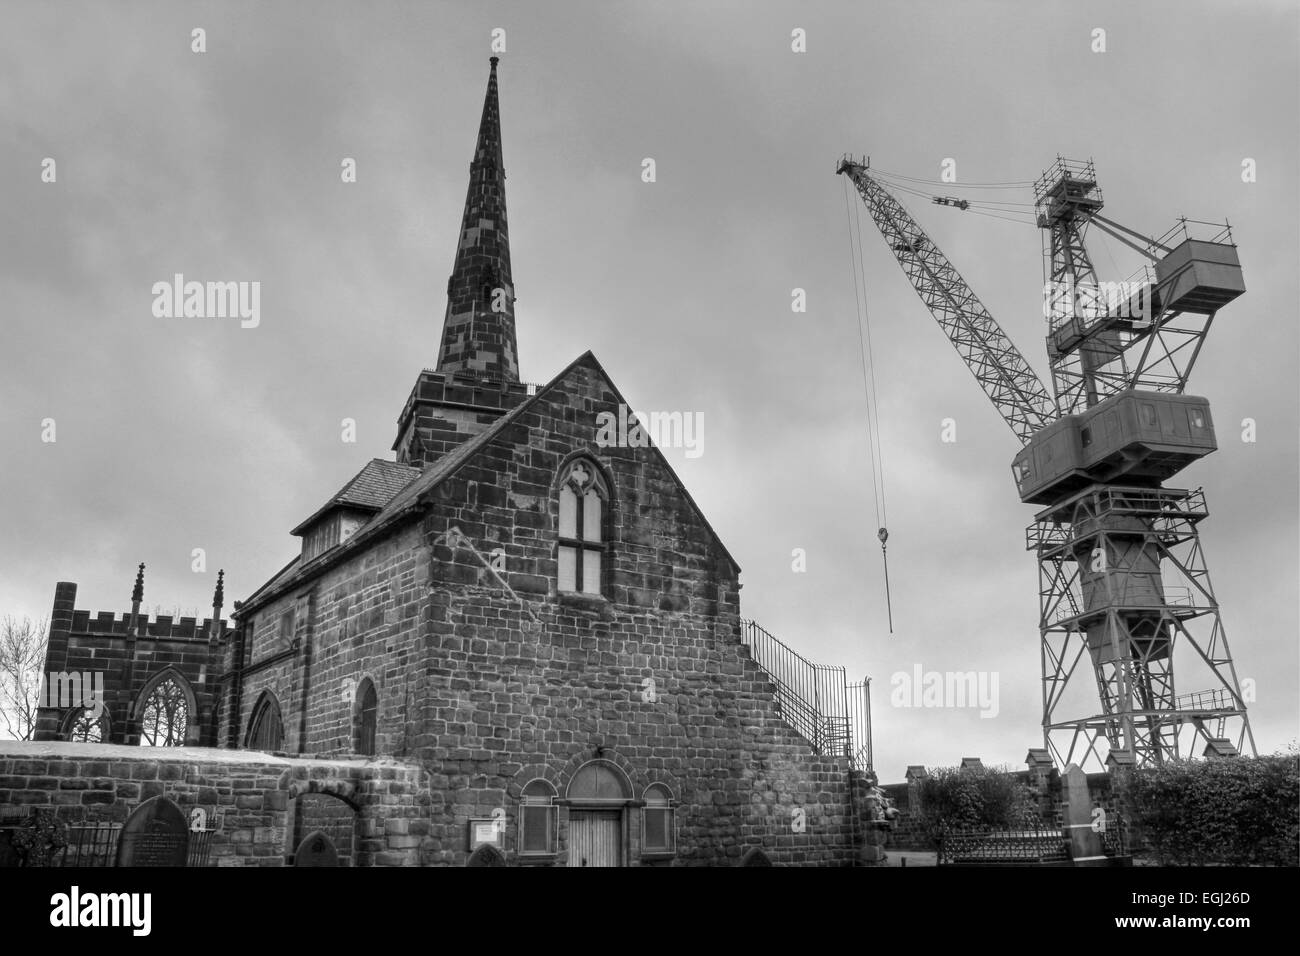 Black and White HDR Photograph Of Birkenhead Priory With A Crane Of The Adjacent Cammell Laird Shipbuilders Stock Photo